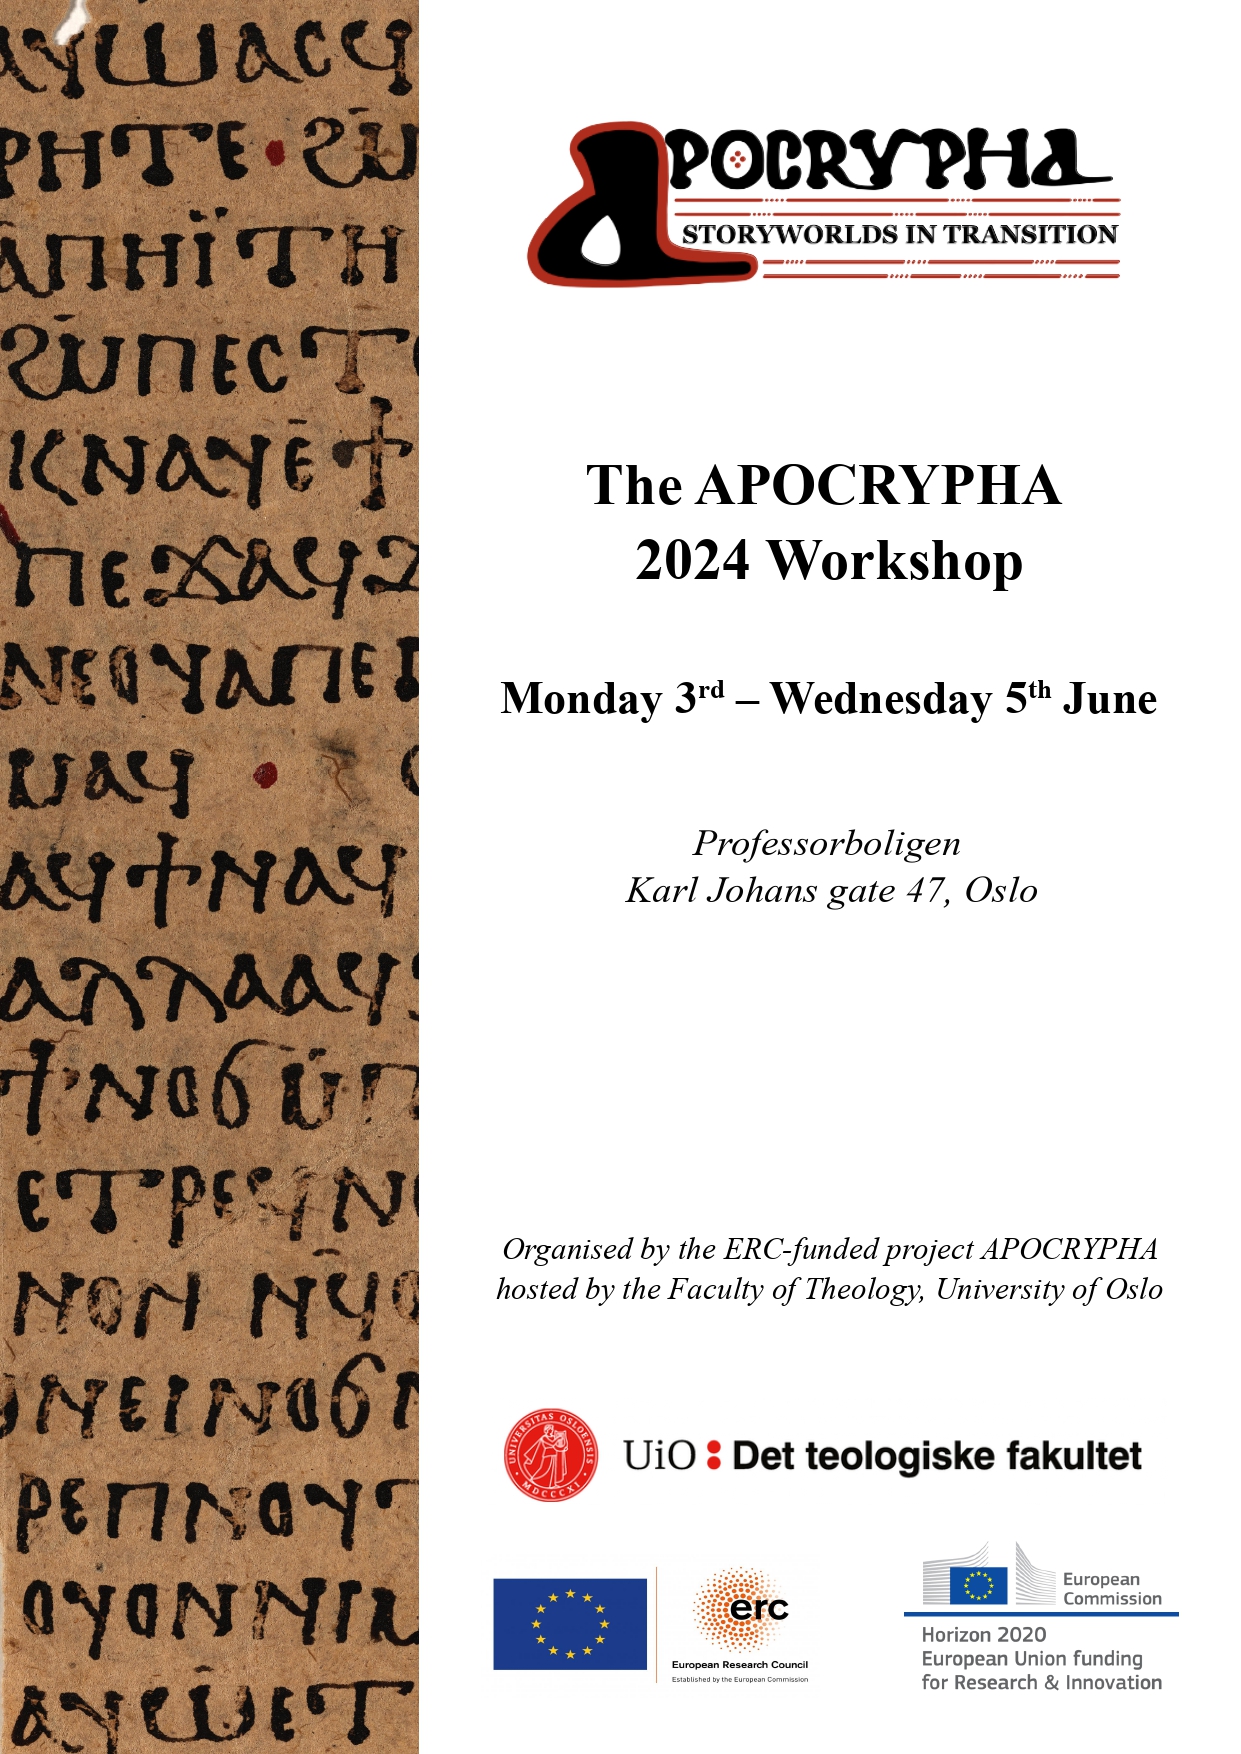 First page of the program for the 2024 APOCRYPHA workshop